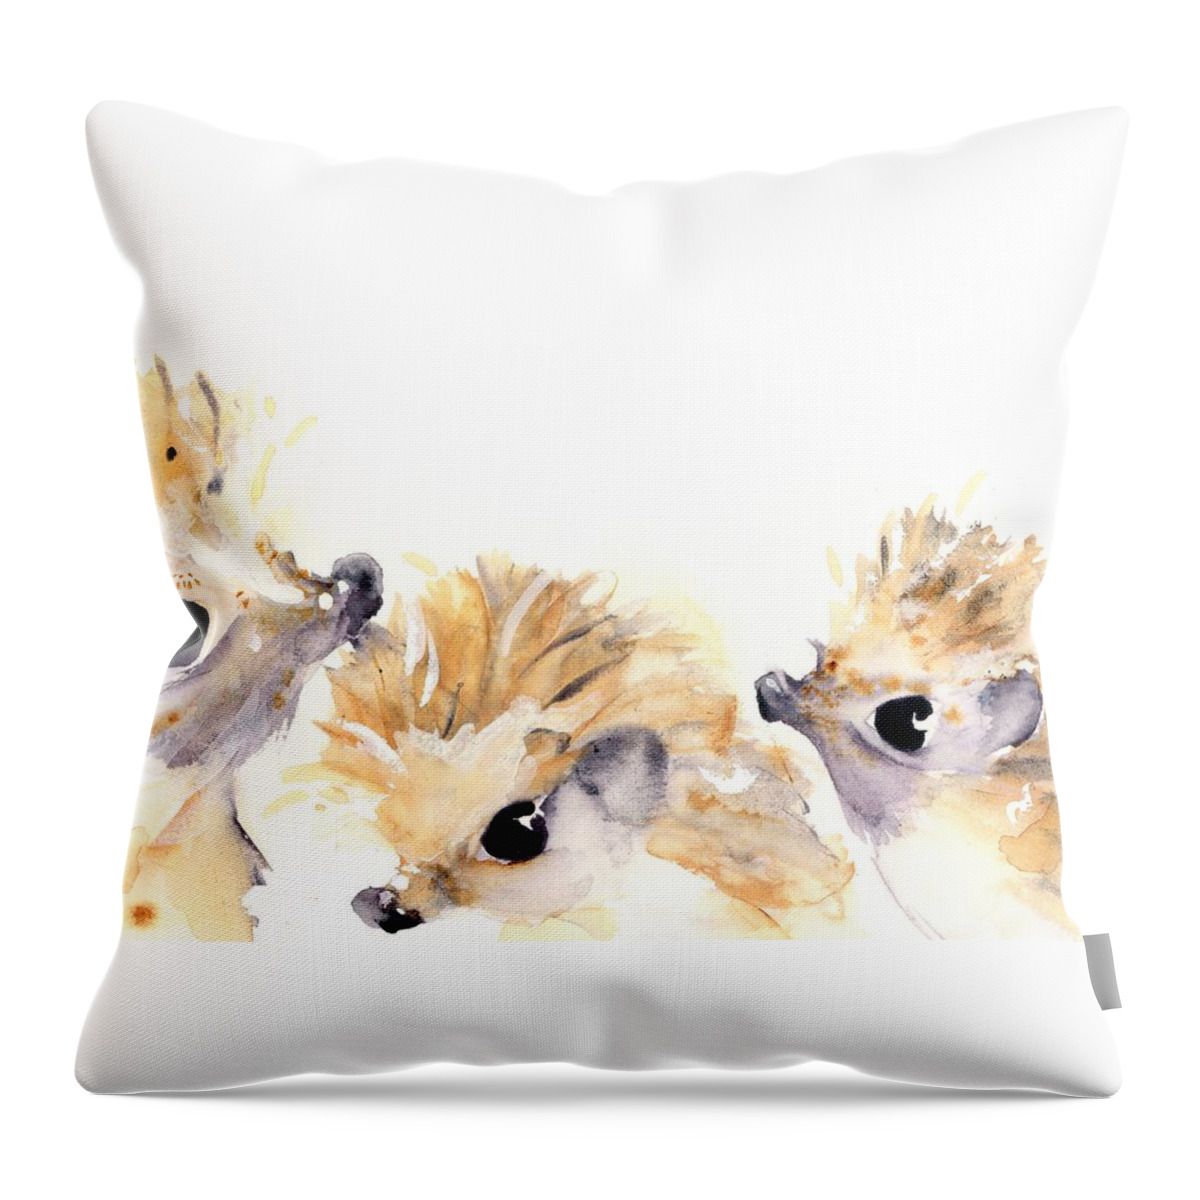 Hedgehog Watercolor Throw Pillow featuring the painting Three Hedgehogs by Dawn Derman